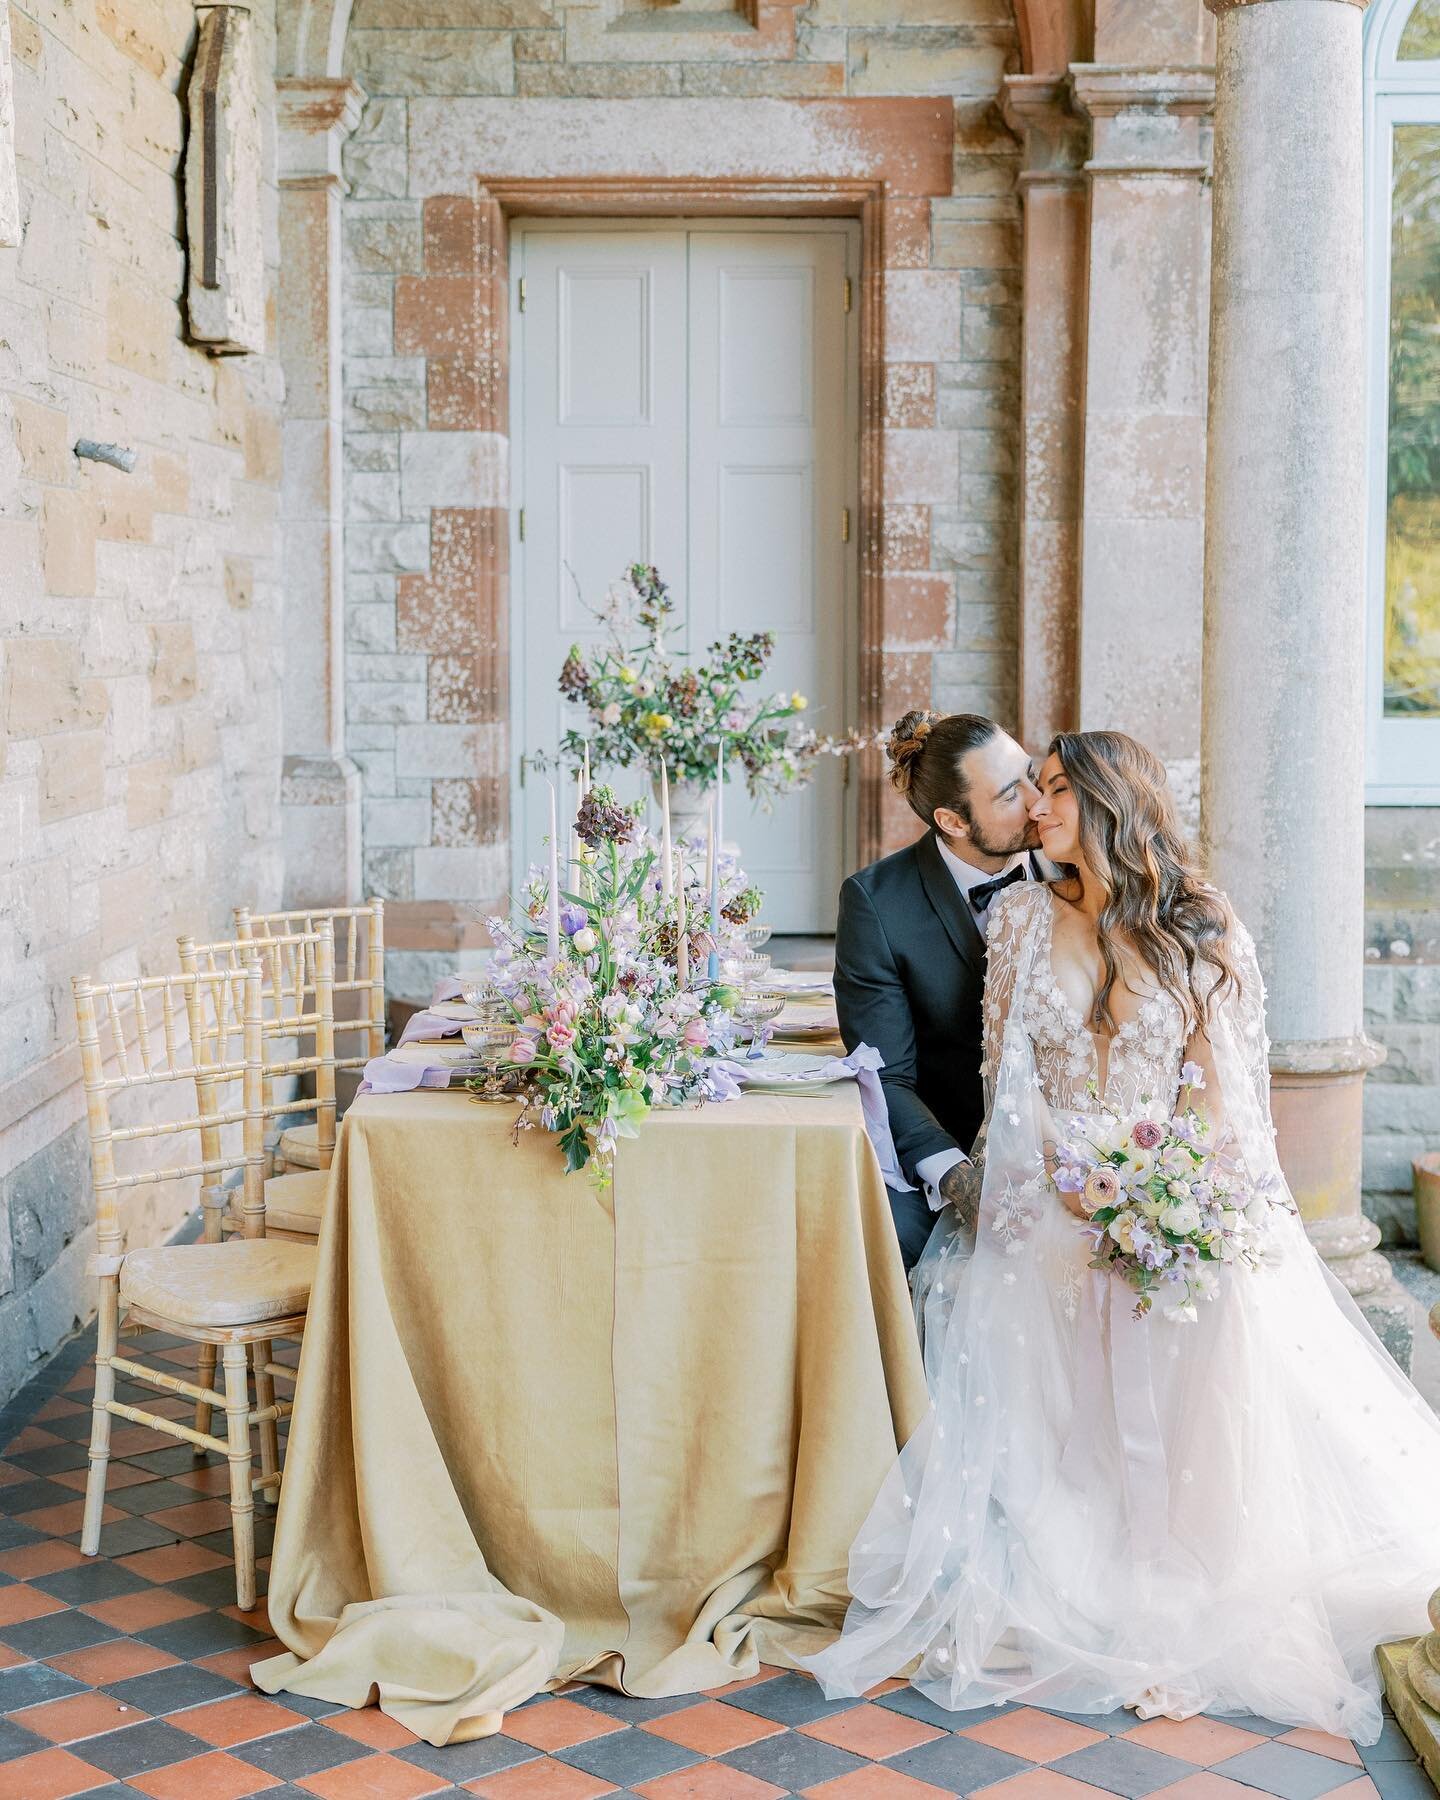 Love this romantic storytelling by @wonderandmagicie at our recent inspirational shoot in Castle Leslie ✨

Really enjoyed creating these florals with @fleurweddings ✨

Vendors: 
Venue: @castleleslie 
Planning, Photography &amp; videography: @wonderan